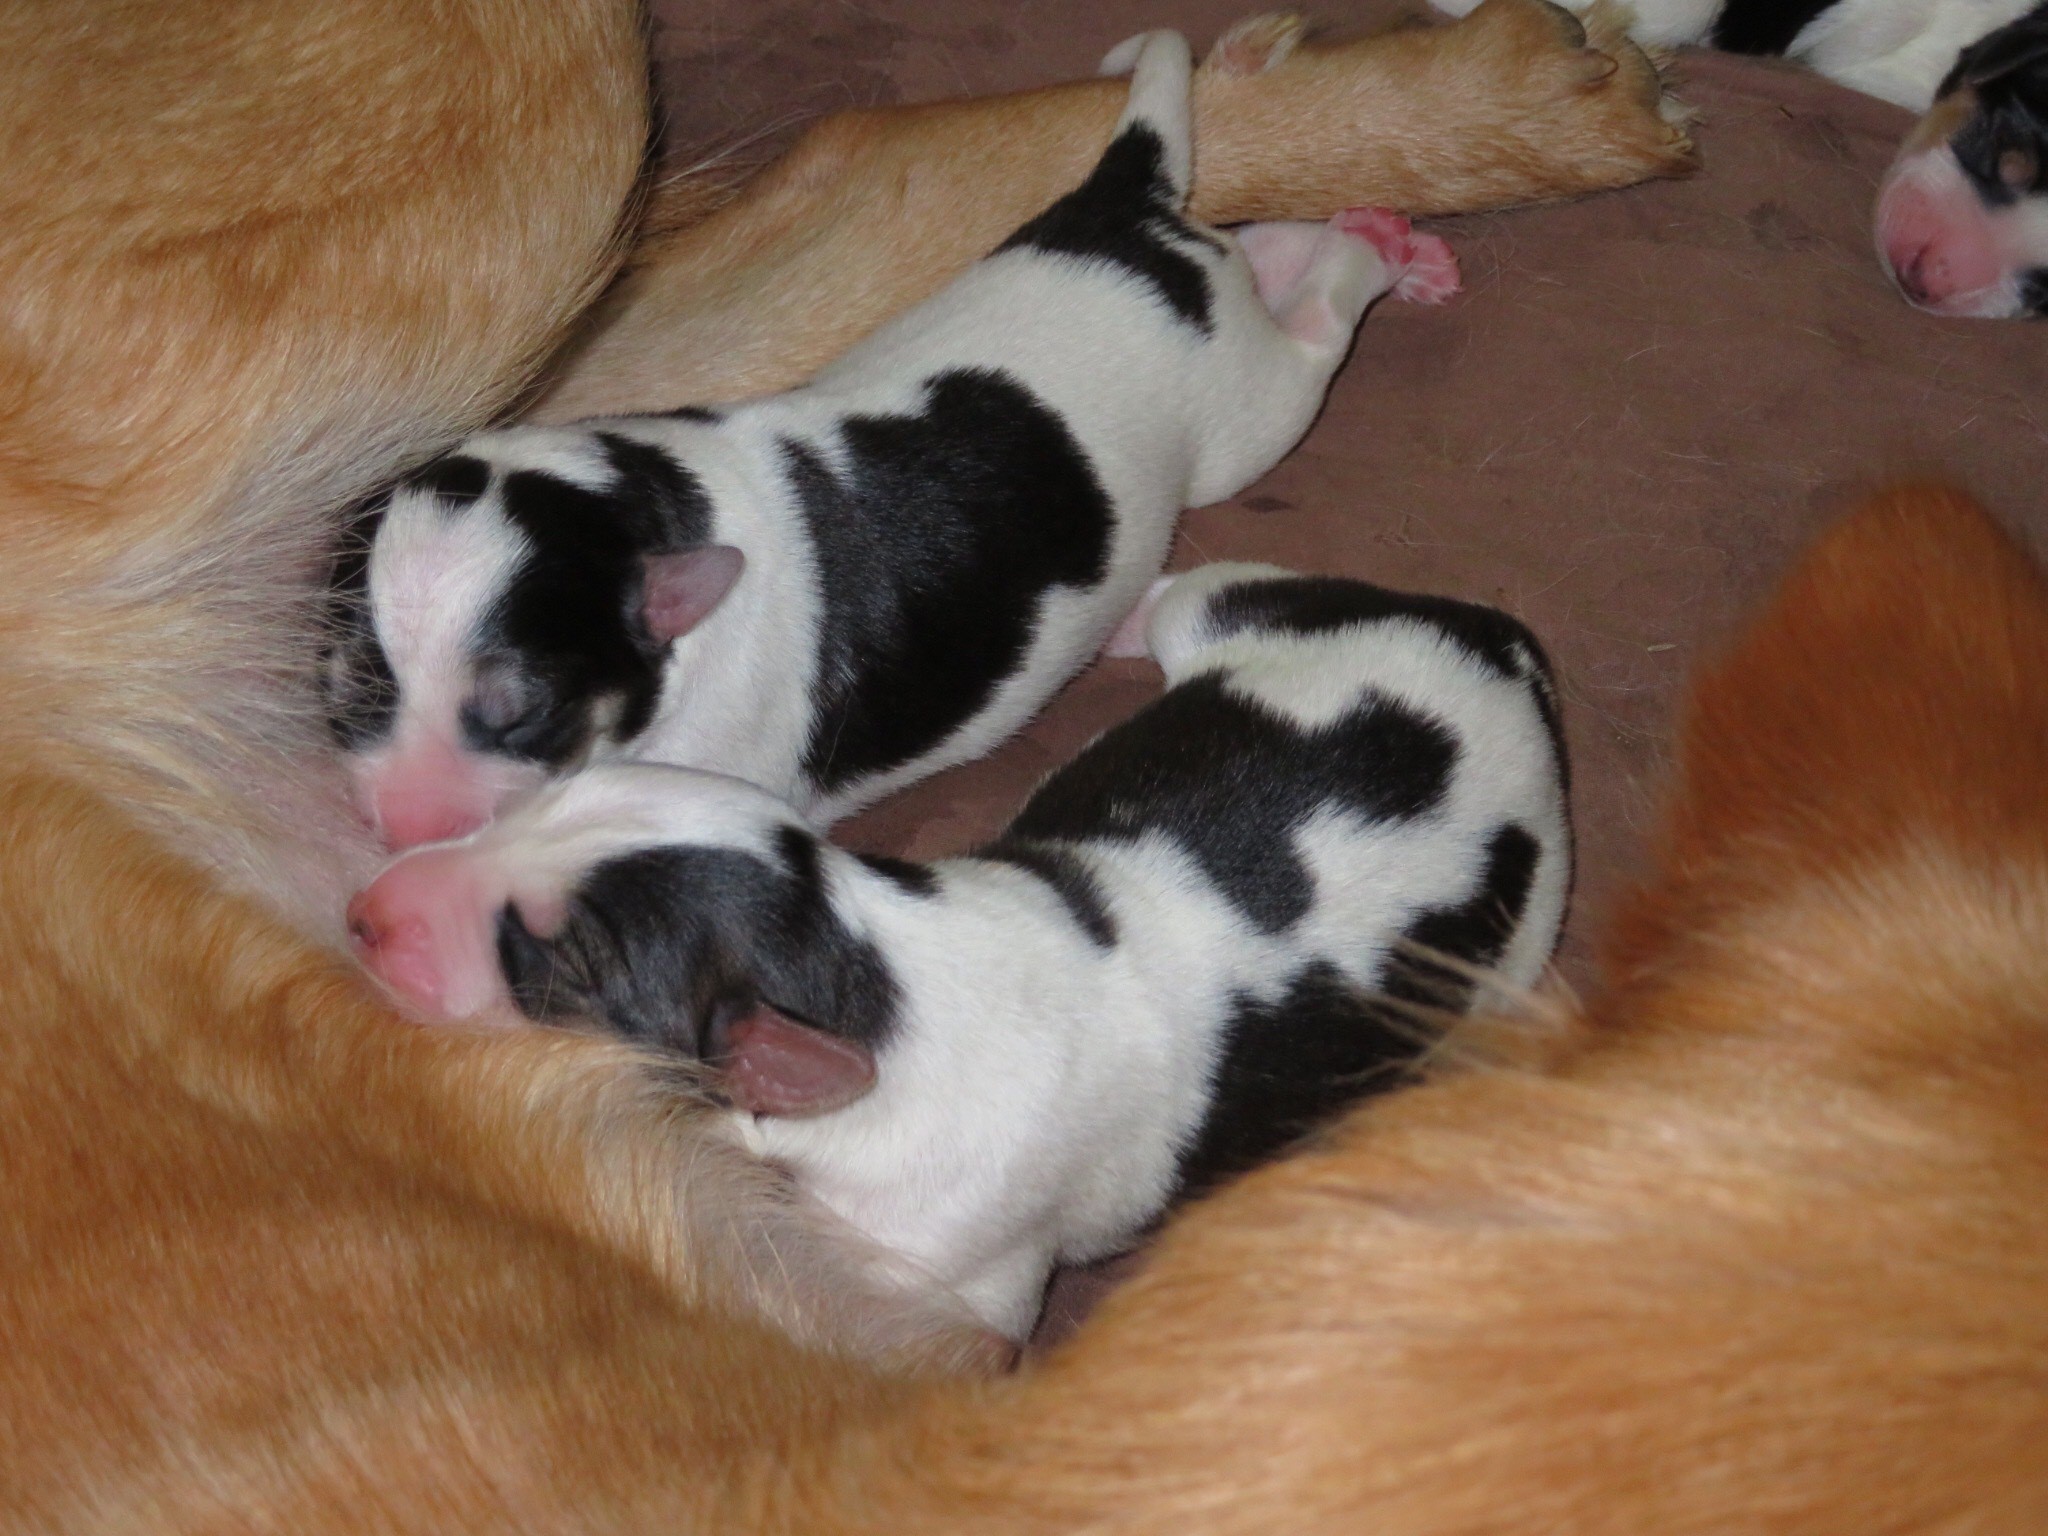 The pups nestled against their mother